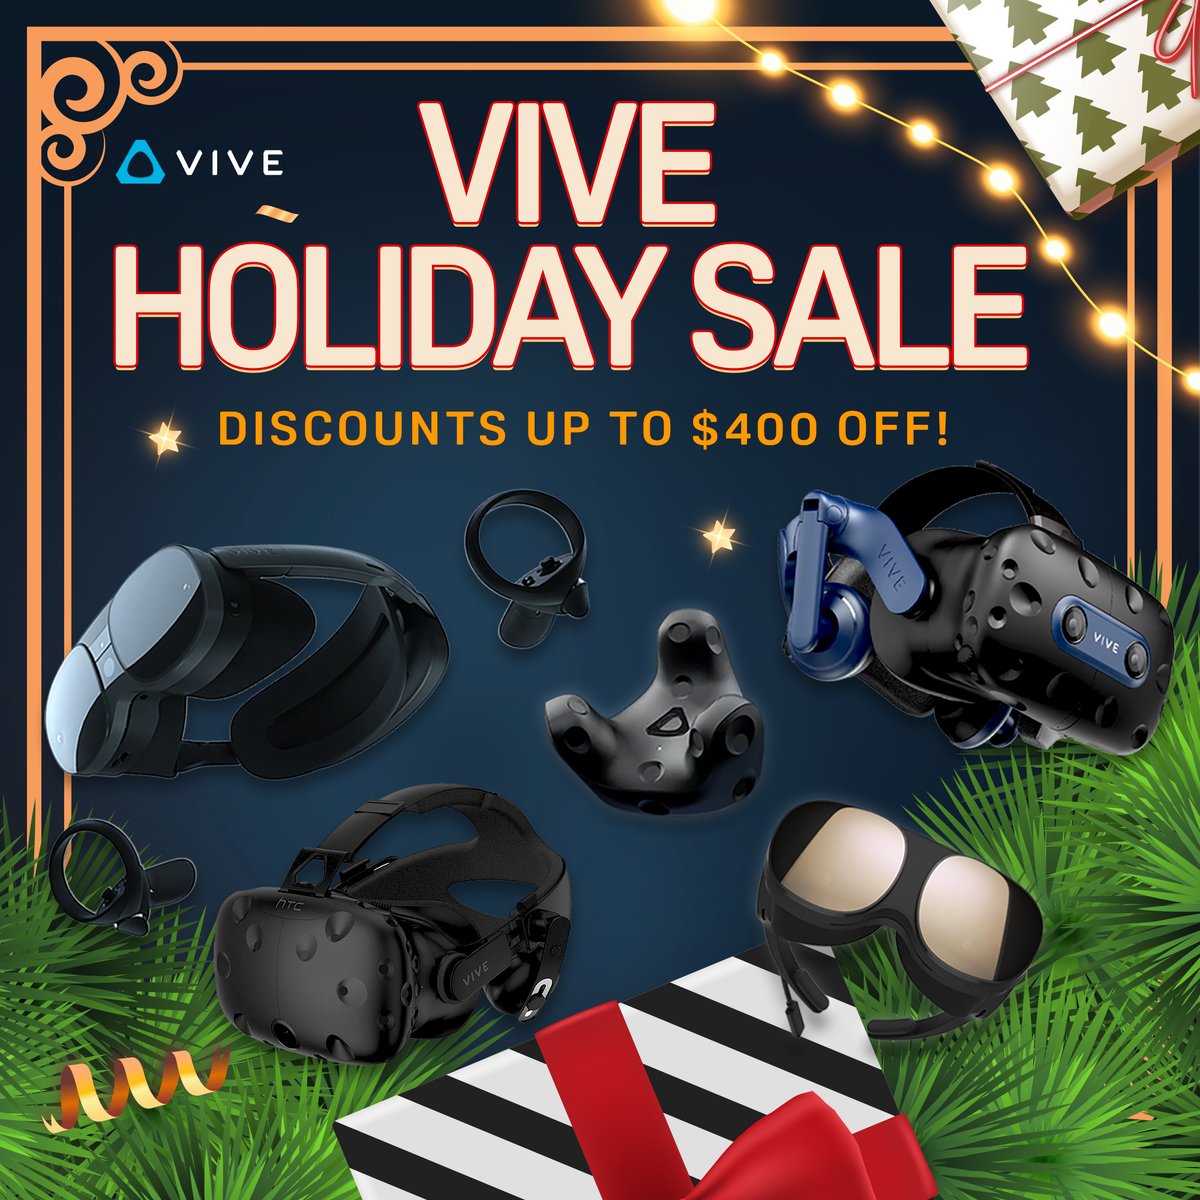 Our Holiday Sale wraps up today! 🎁 Grab the best discounts while you still can: htcvive.co/VHS23X #VR #VIRTUALREALITY #TECH #VRTECH #GADGETS #GIFTGUIDE #GIFTING #CHRISTMASGIFT #STOCKINGSTUFFER #CHRISTMASSALE #HOLIDAYSALE #ENDOFYEARSALE